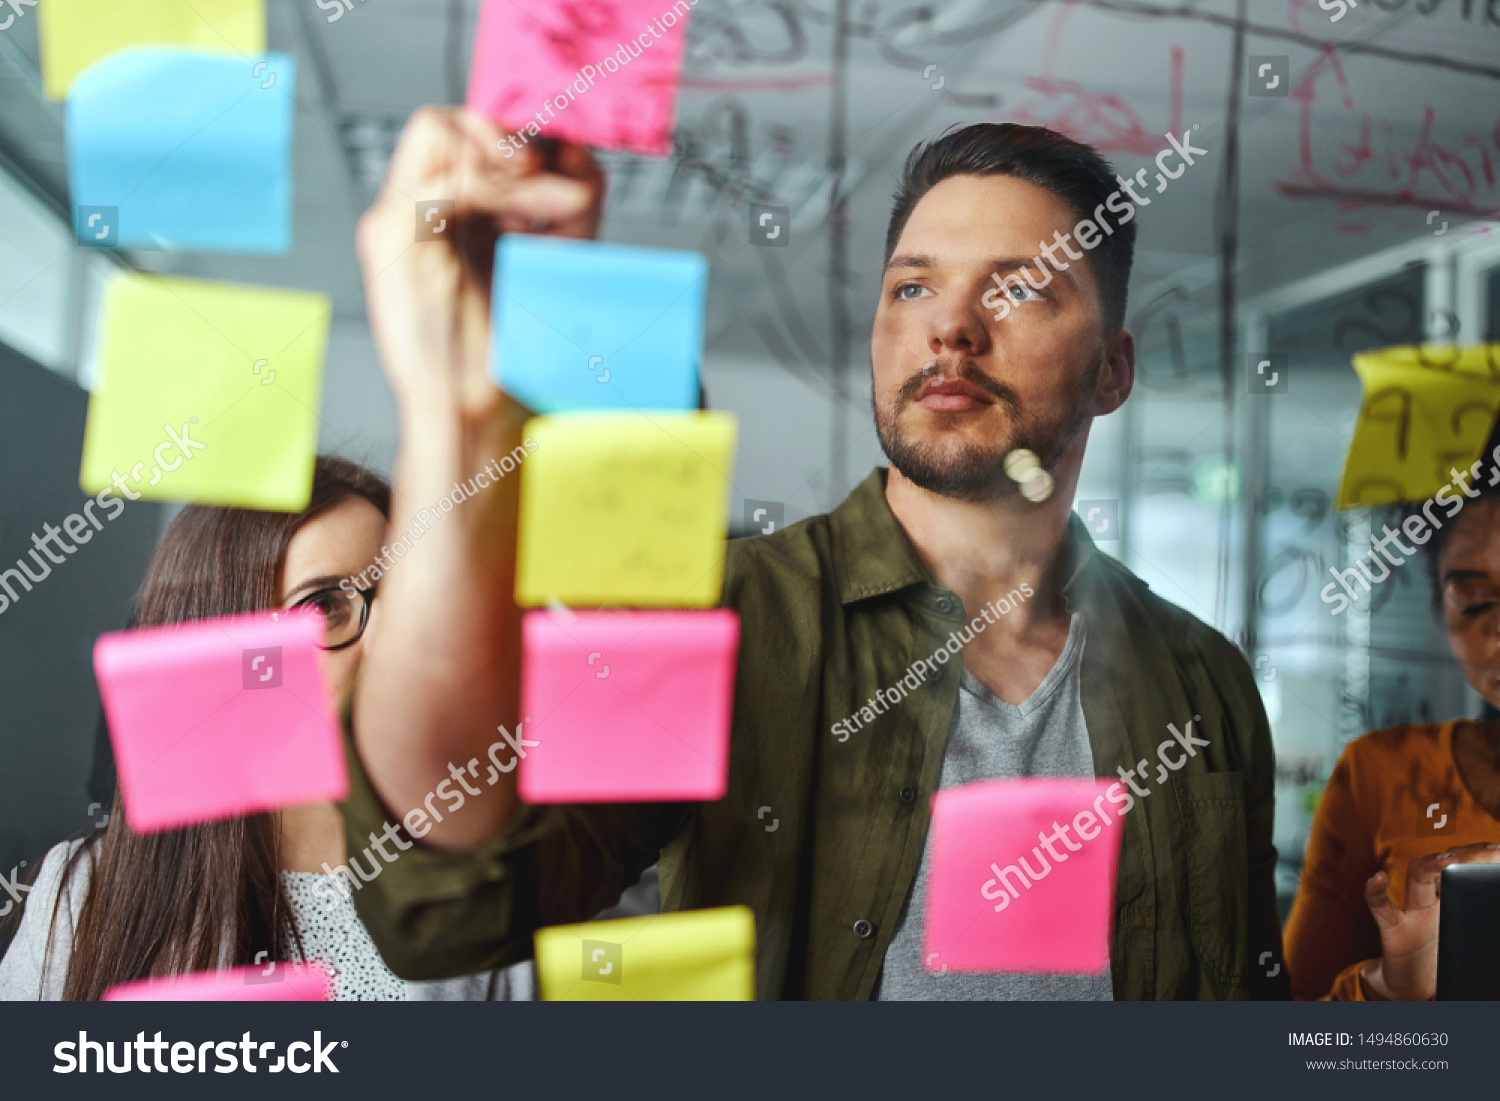 Concentrated male executive discussing business ideas with colleagues by writing on sticky notes pasted over the glass board #1494860630